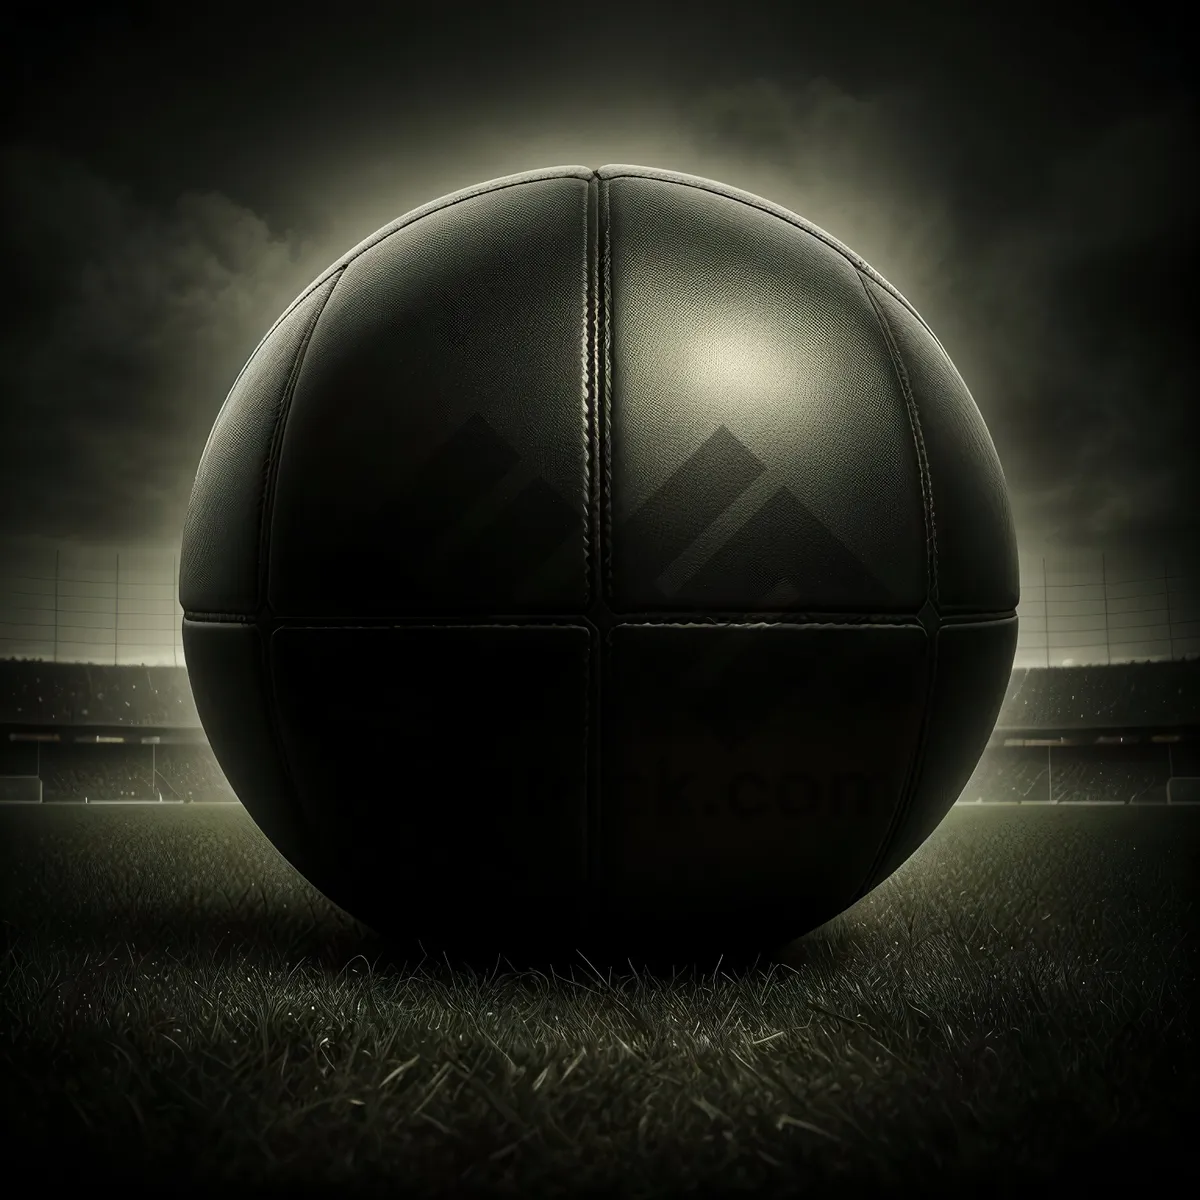 Picture of Global Sports Clash: Symbolic Soccer Ball Championship